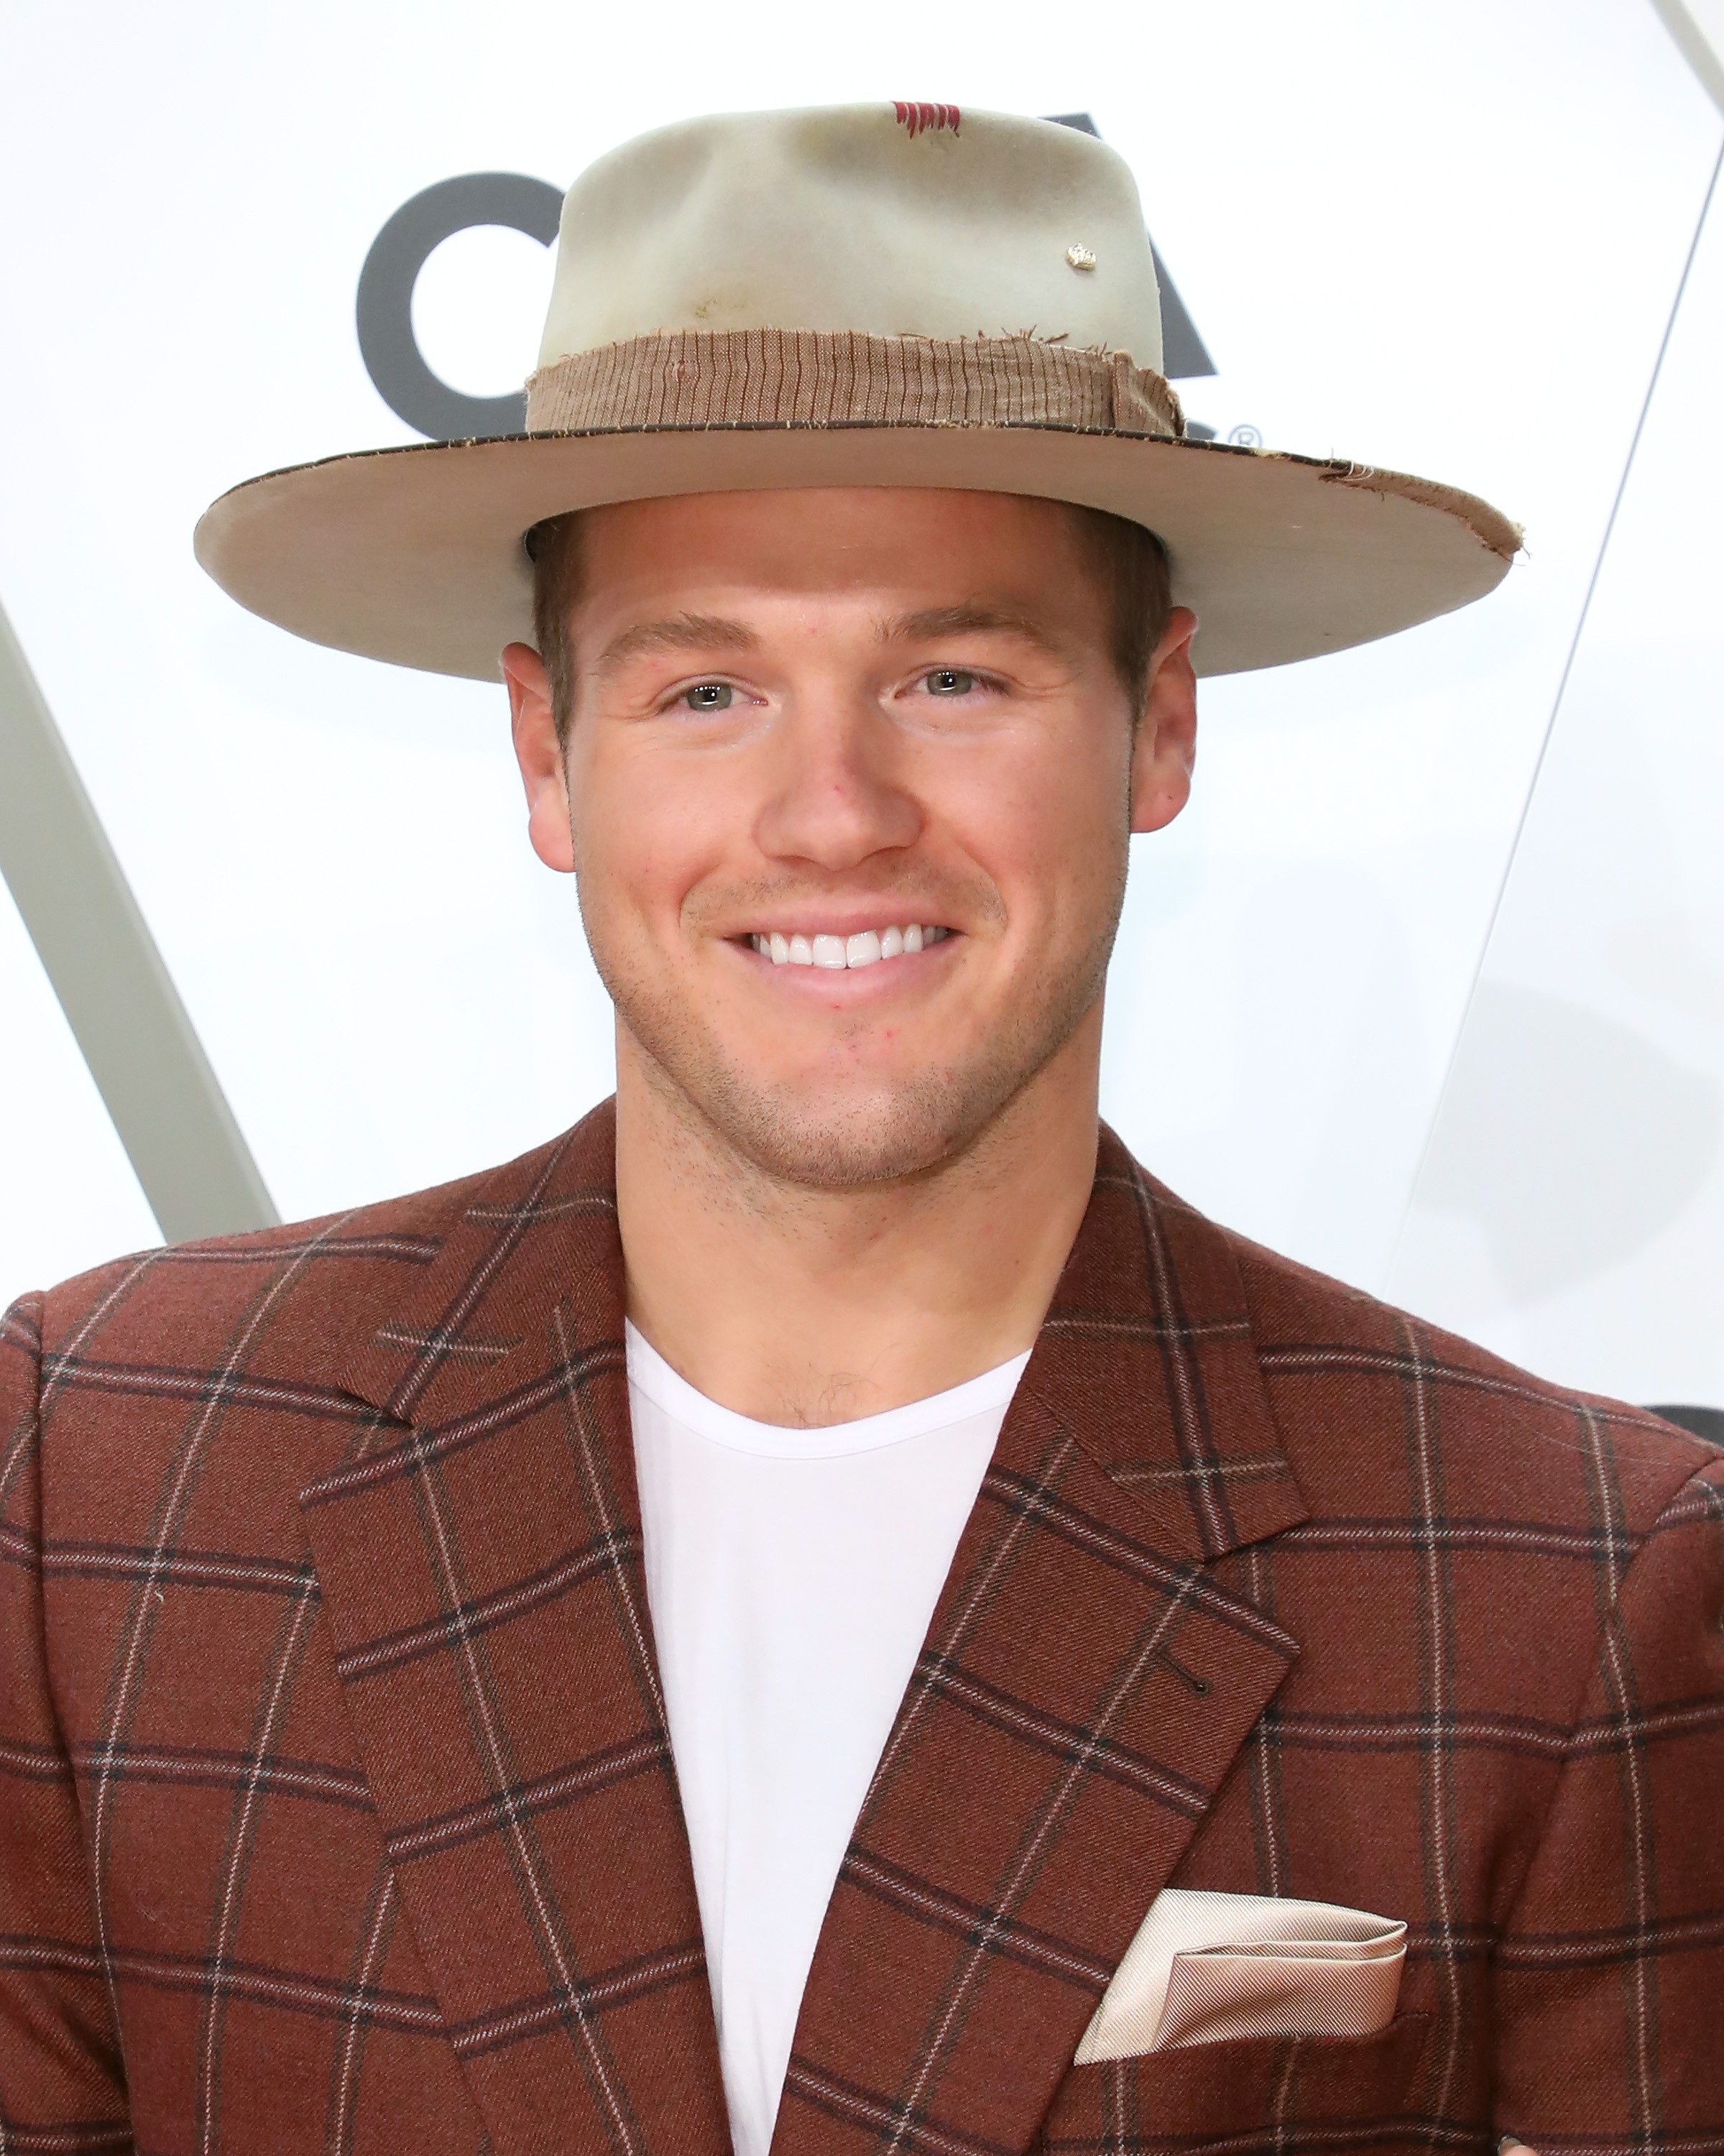 NASHVILLE, TENNESSEE - NOVEMBER 13: (FOR EDITORIAL USE ONLY)  Colton Underwood attends the 53nd annual CMA Awards at Bridgestone Arena on November 13, 2019 in Nashville, Tennessee. (Photo by Taylor Hill/Getty Images) (Foto: Getty Images)